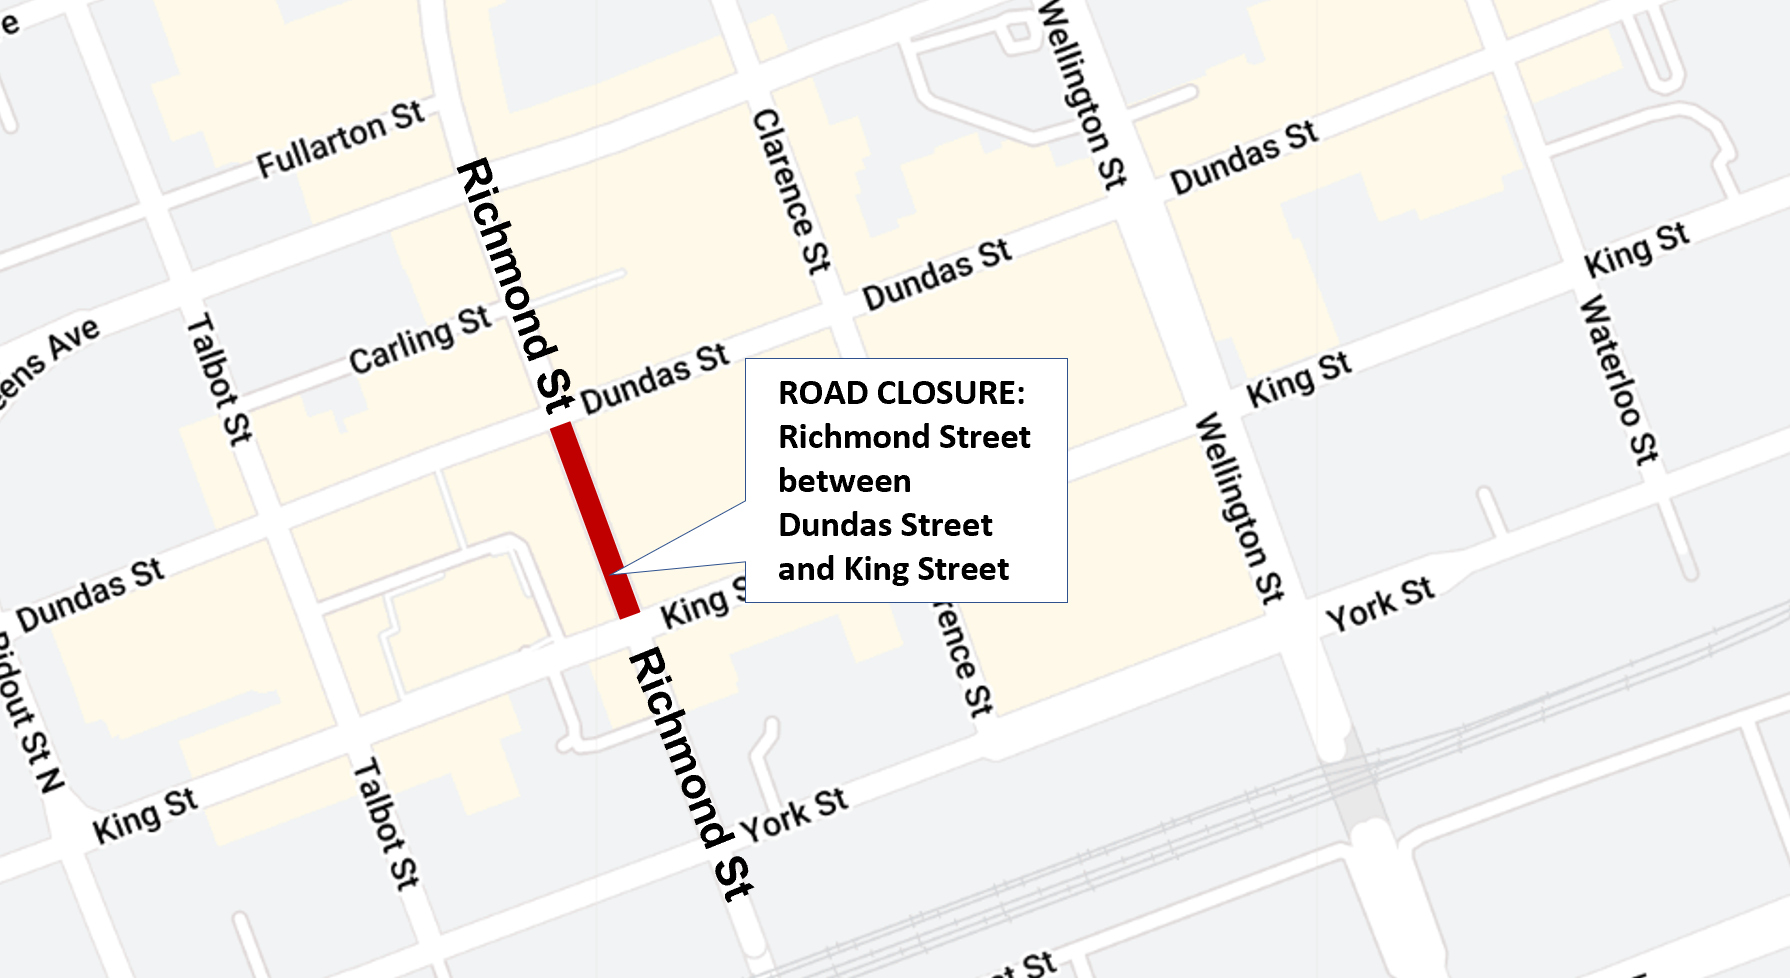 Road closure map to accommodate for filming downtown